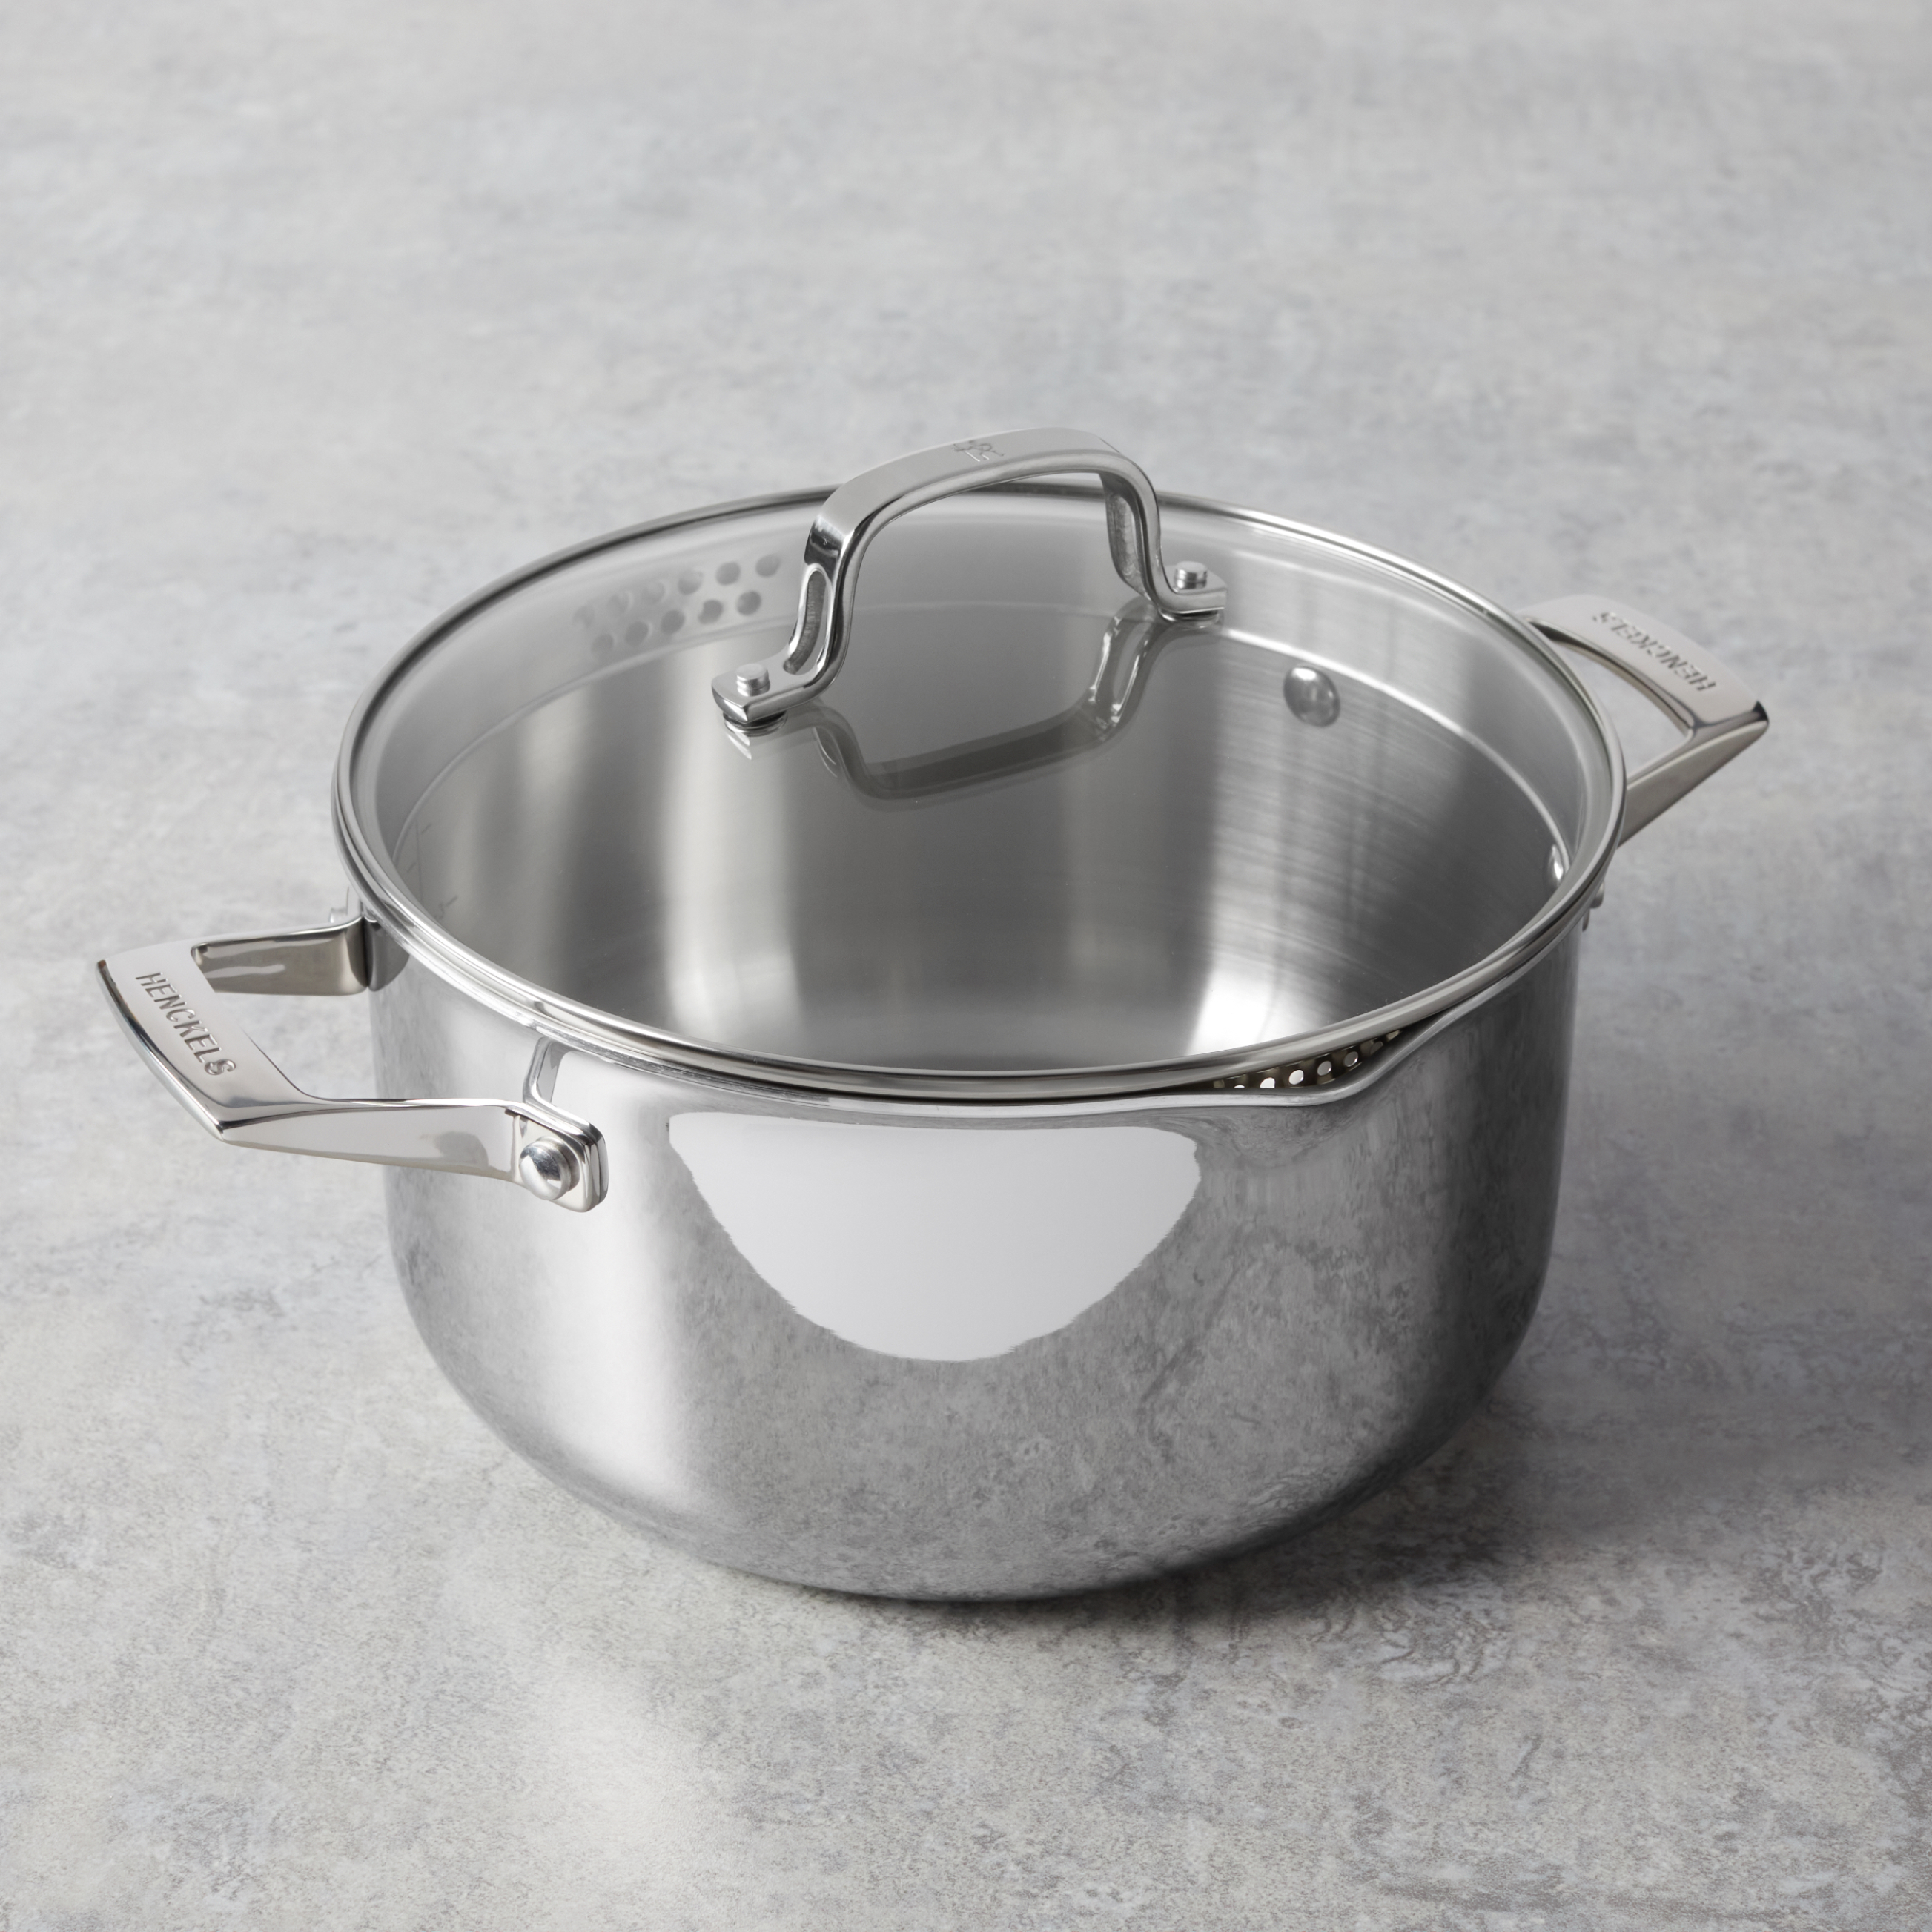 Henckels Clad H3 8-Inch Stainless Steel Fry Pan - Stainless Steel - 39  requests